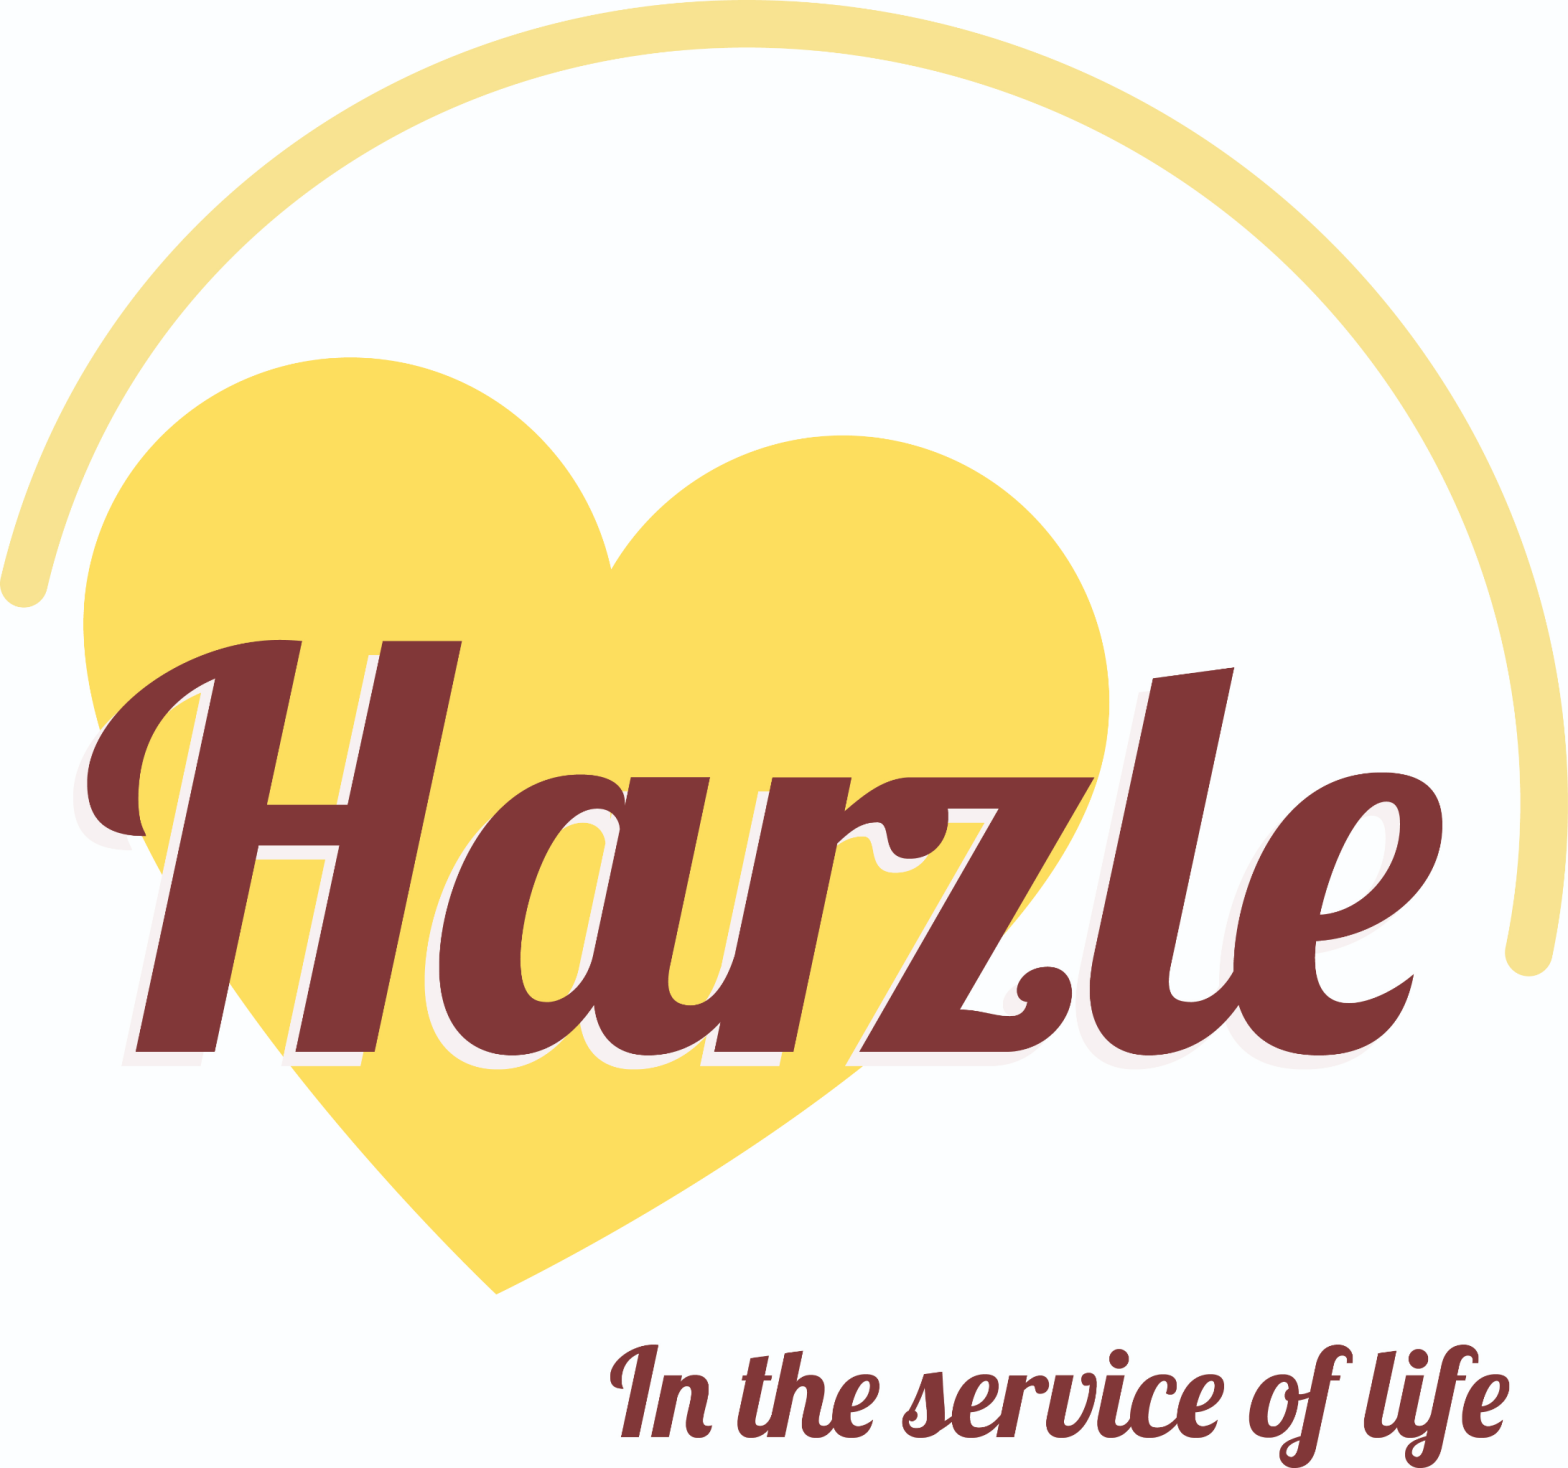 Harzle.com – In the service of Life